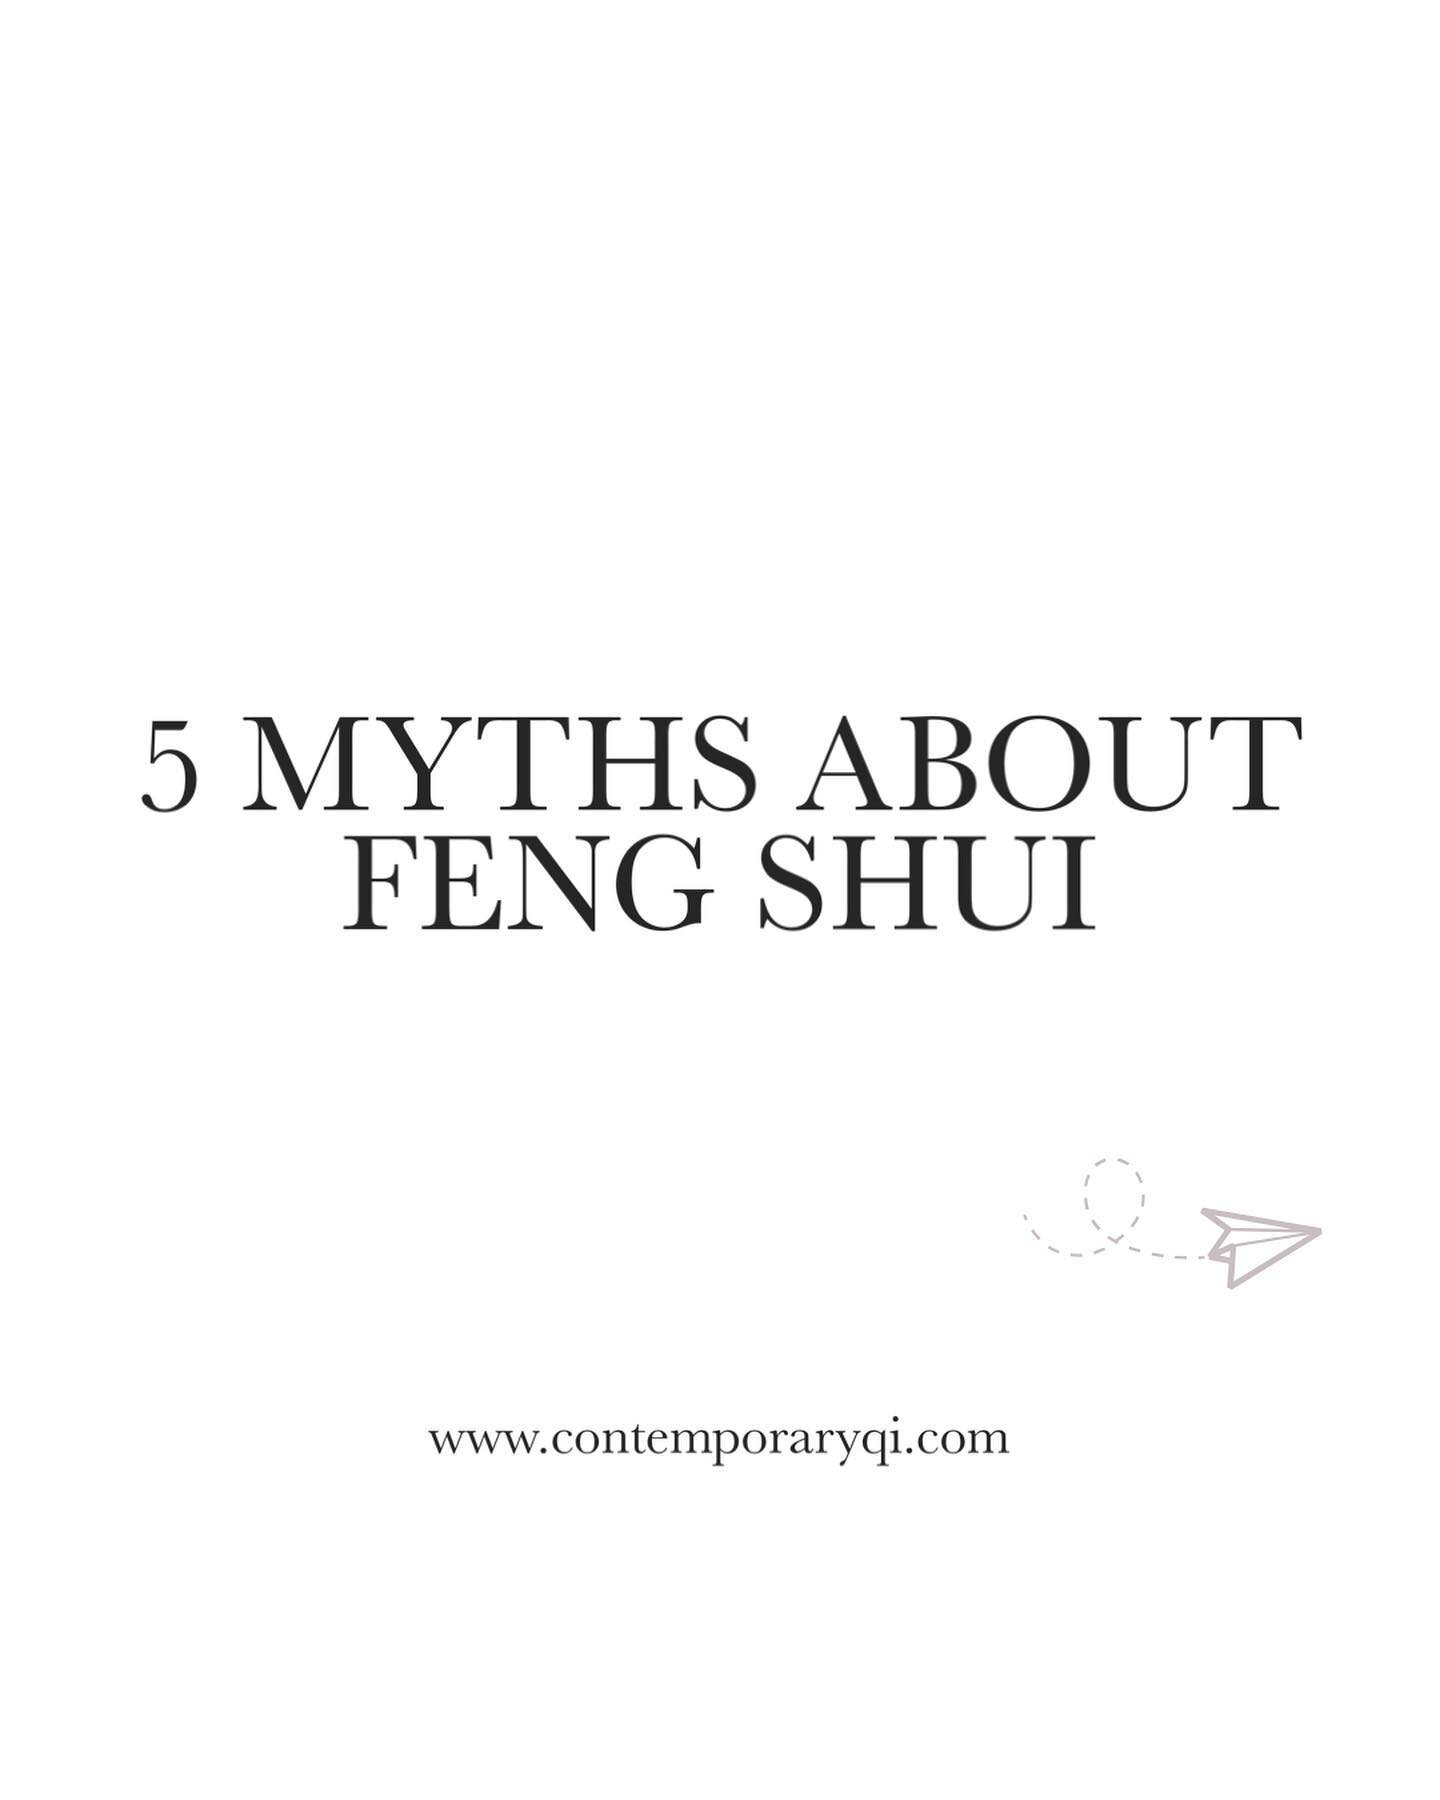 There are so many misconceptions about Feng Shui.

Do you have any beliefs about Feng Shui? Let me know below 👇🏼

#fengshuimyths #fengshui #fengshuitips #perthfengshui #fengshuiaustralia #findyourflow #contemporaryqi #energyhealing #energywork #man